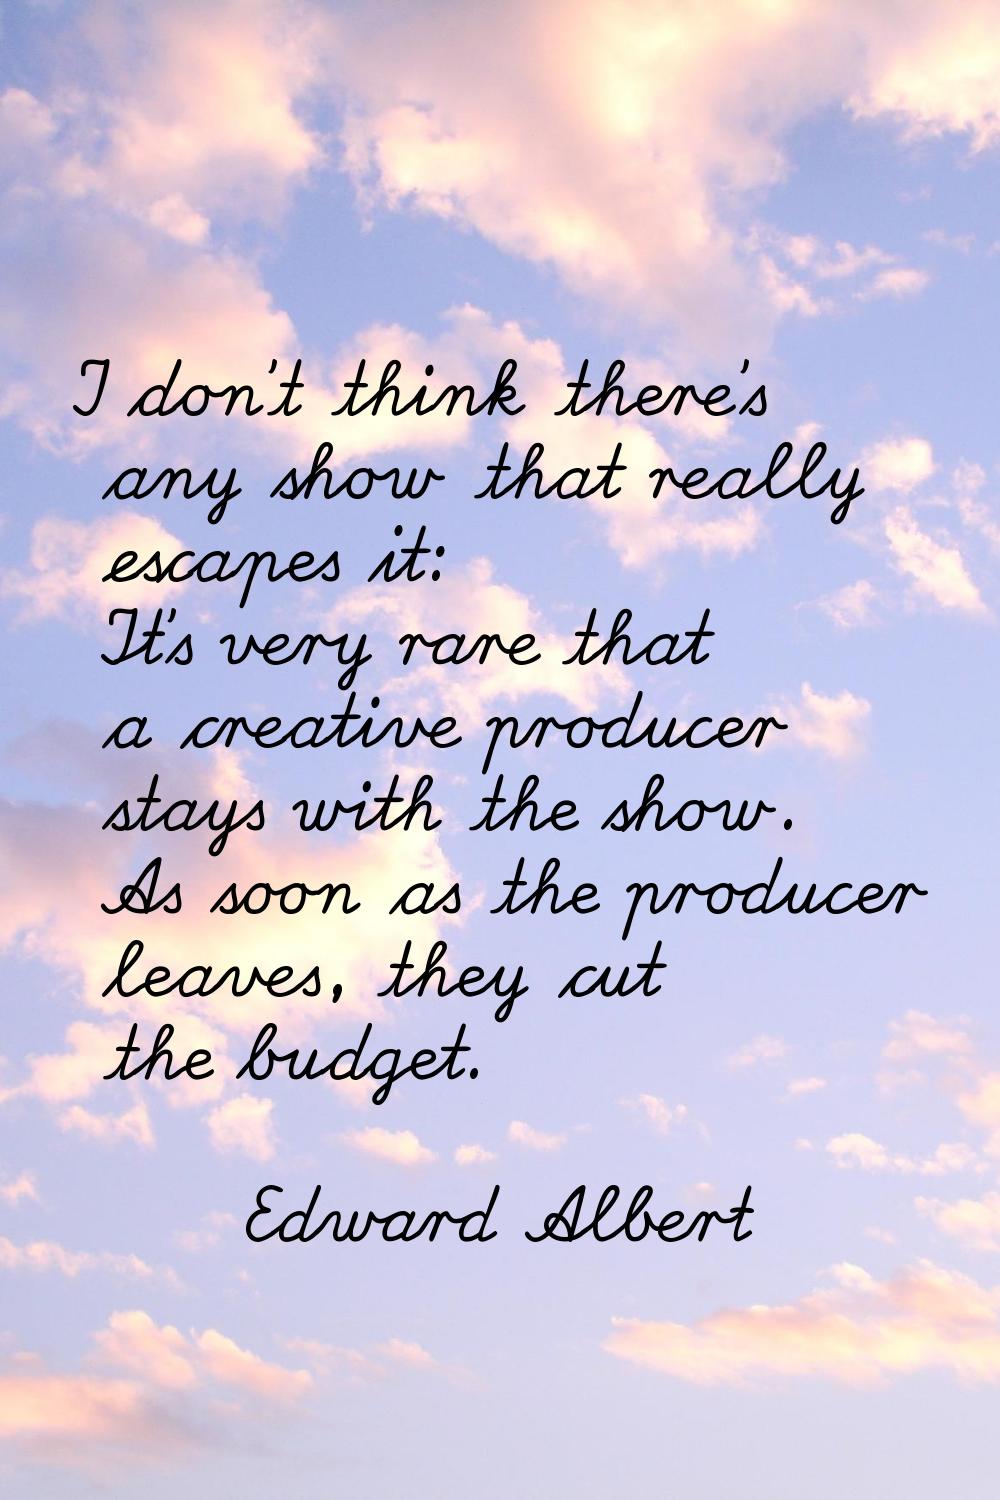 I don't think there's any show that really escapes it: It's very rare that a creative producer stay